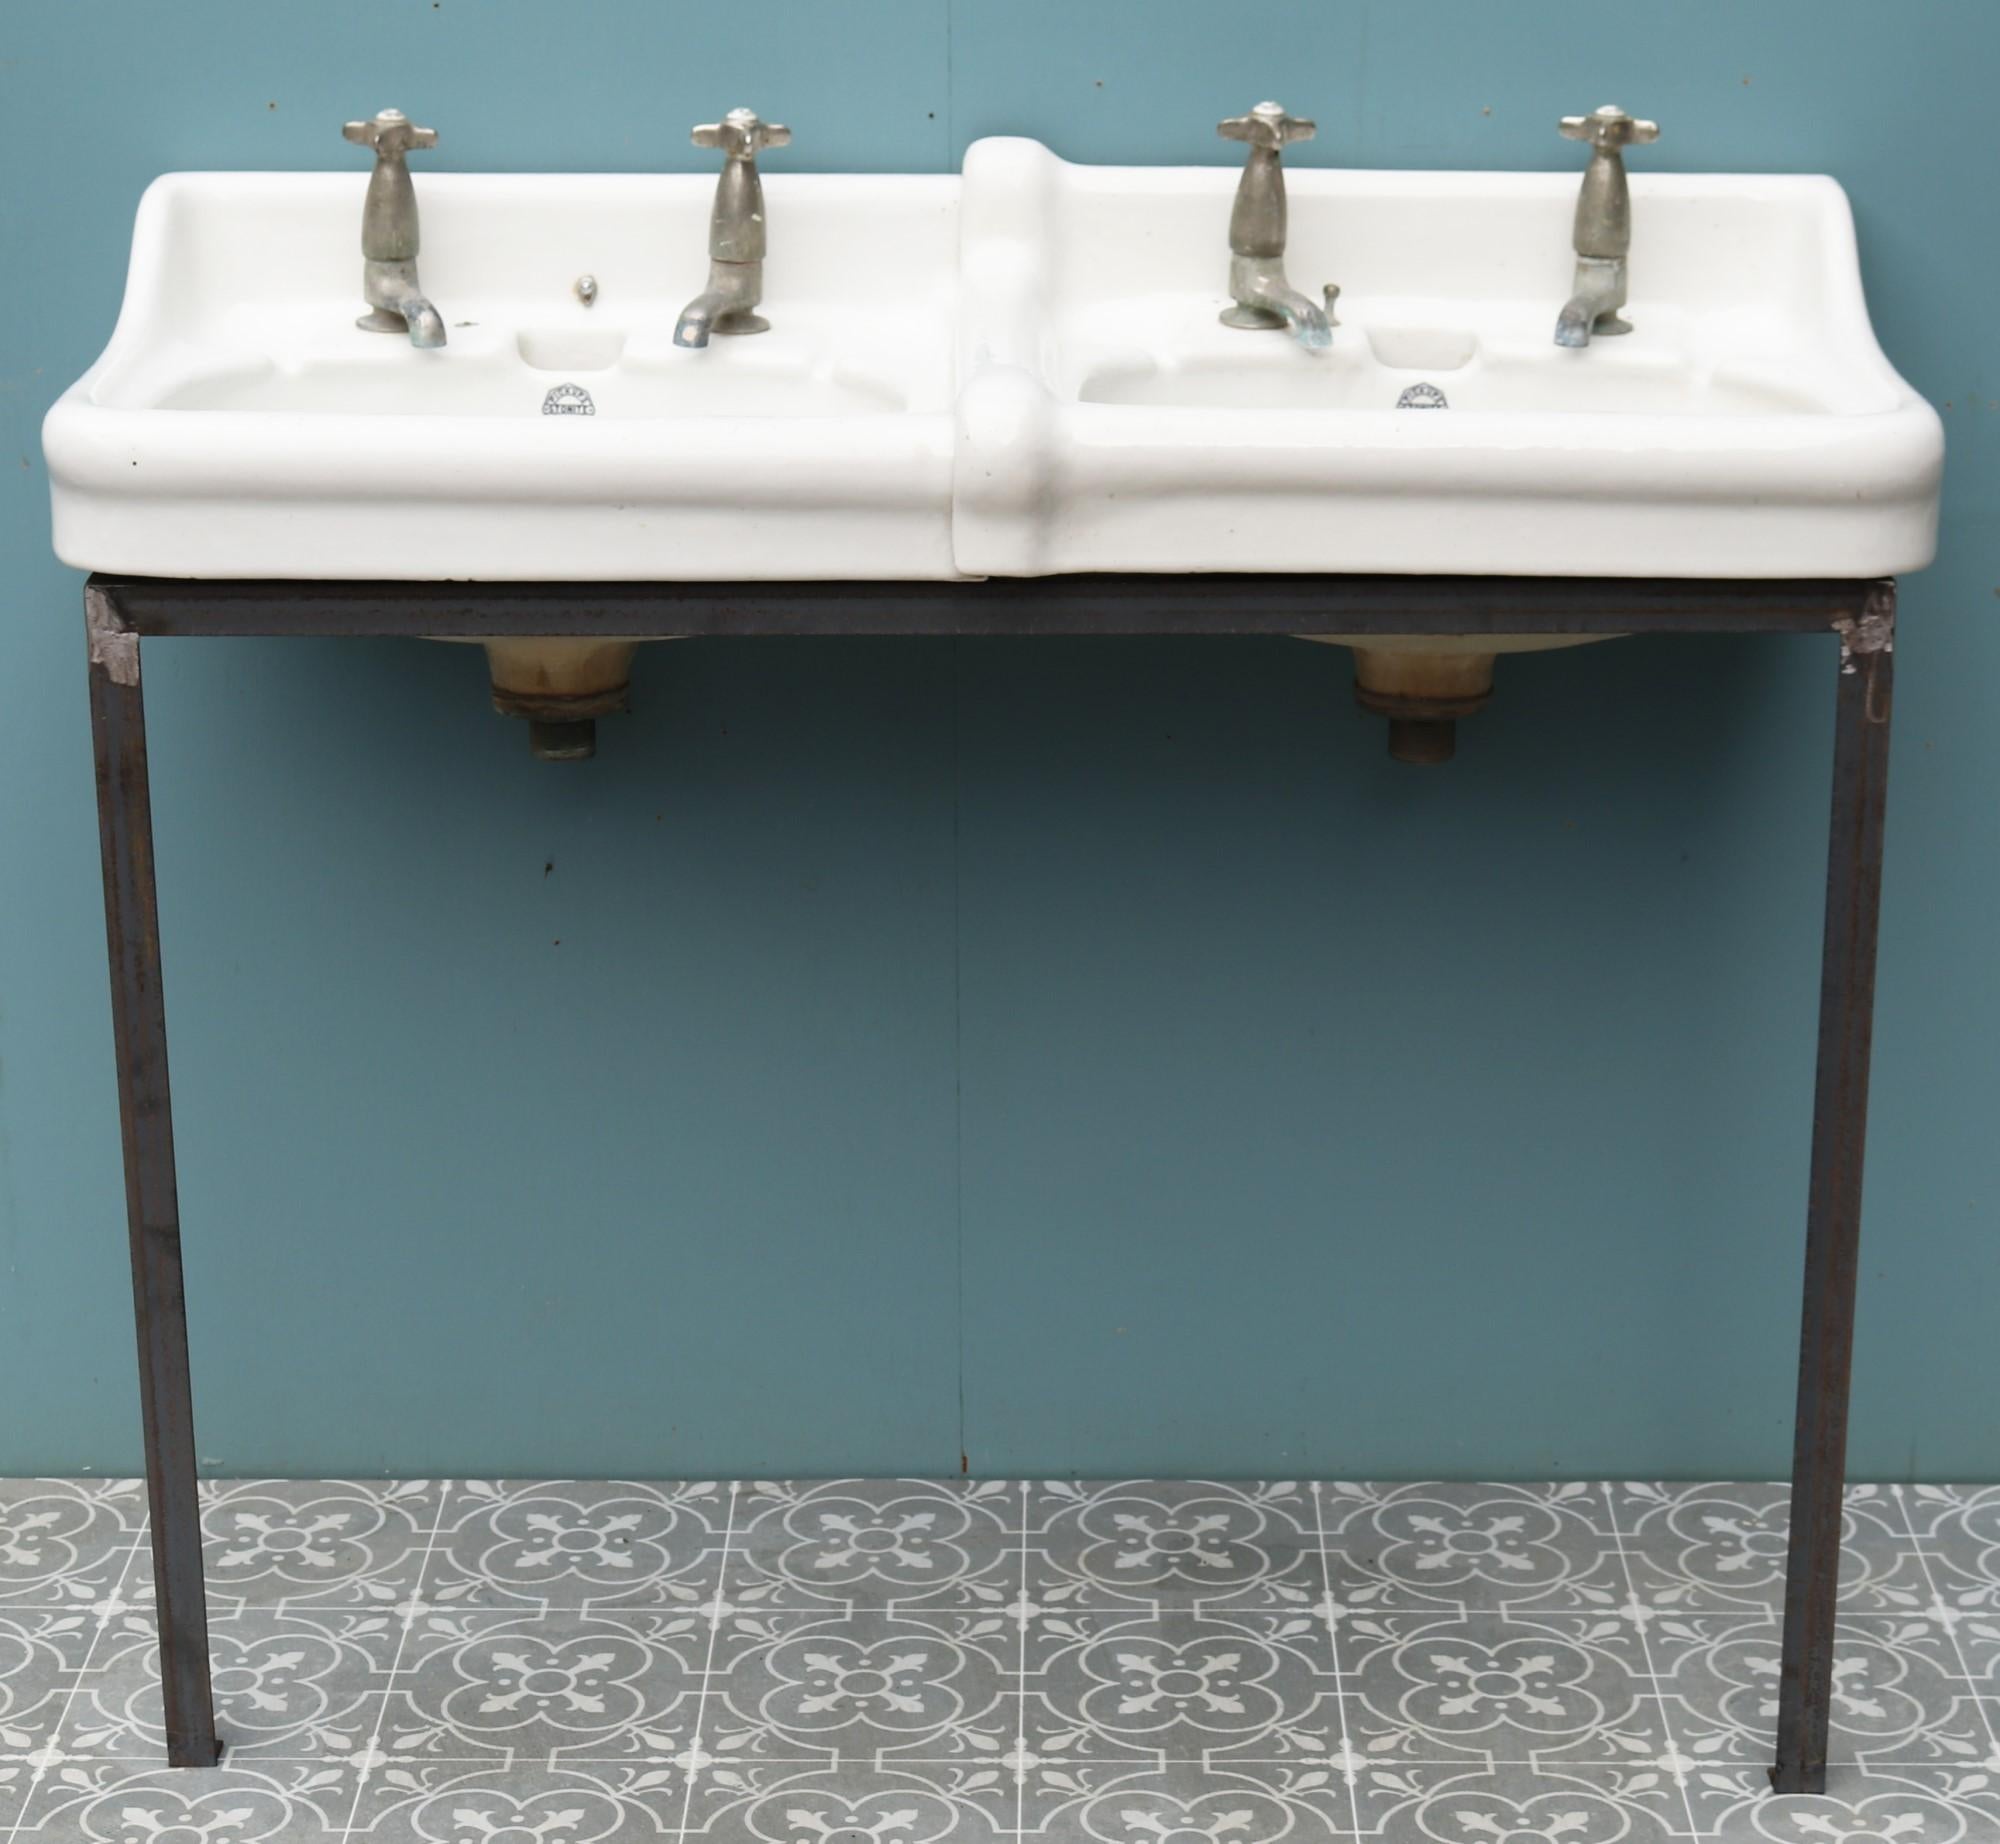 A reclaimed double sink manufactured by Pickups of Horwich. Supplied with a modern steel stand.